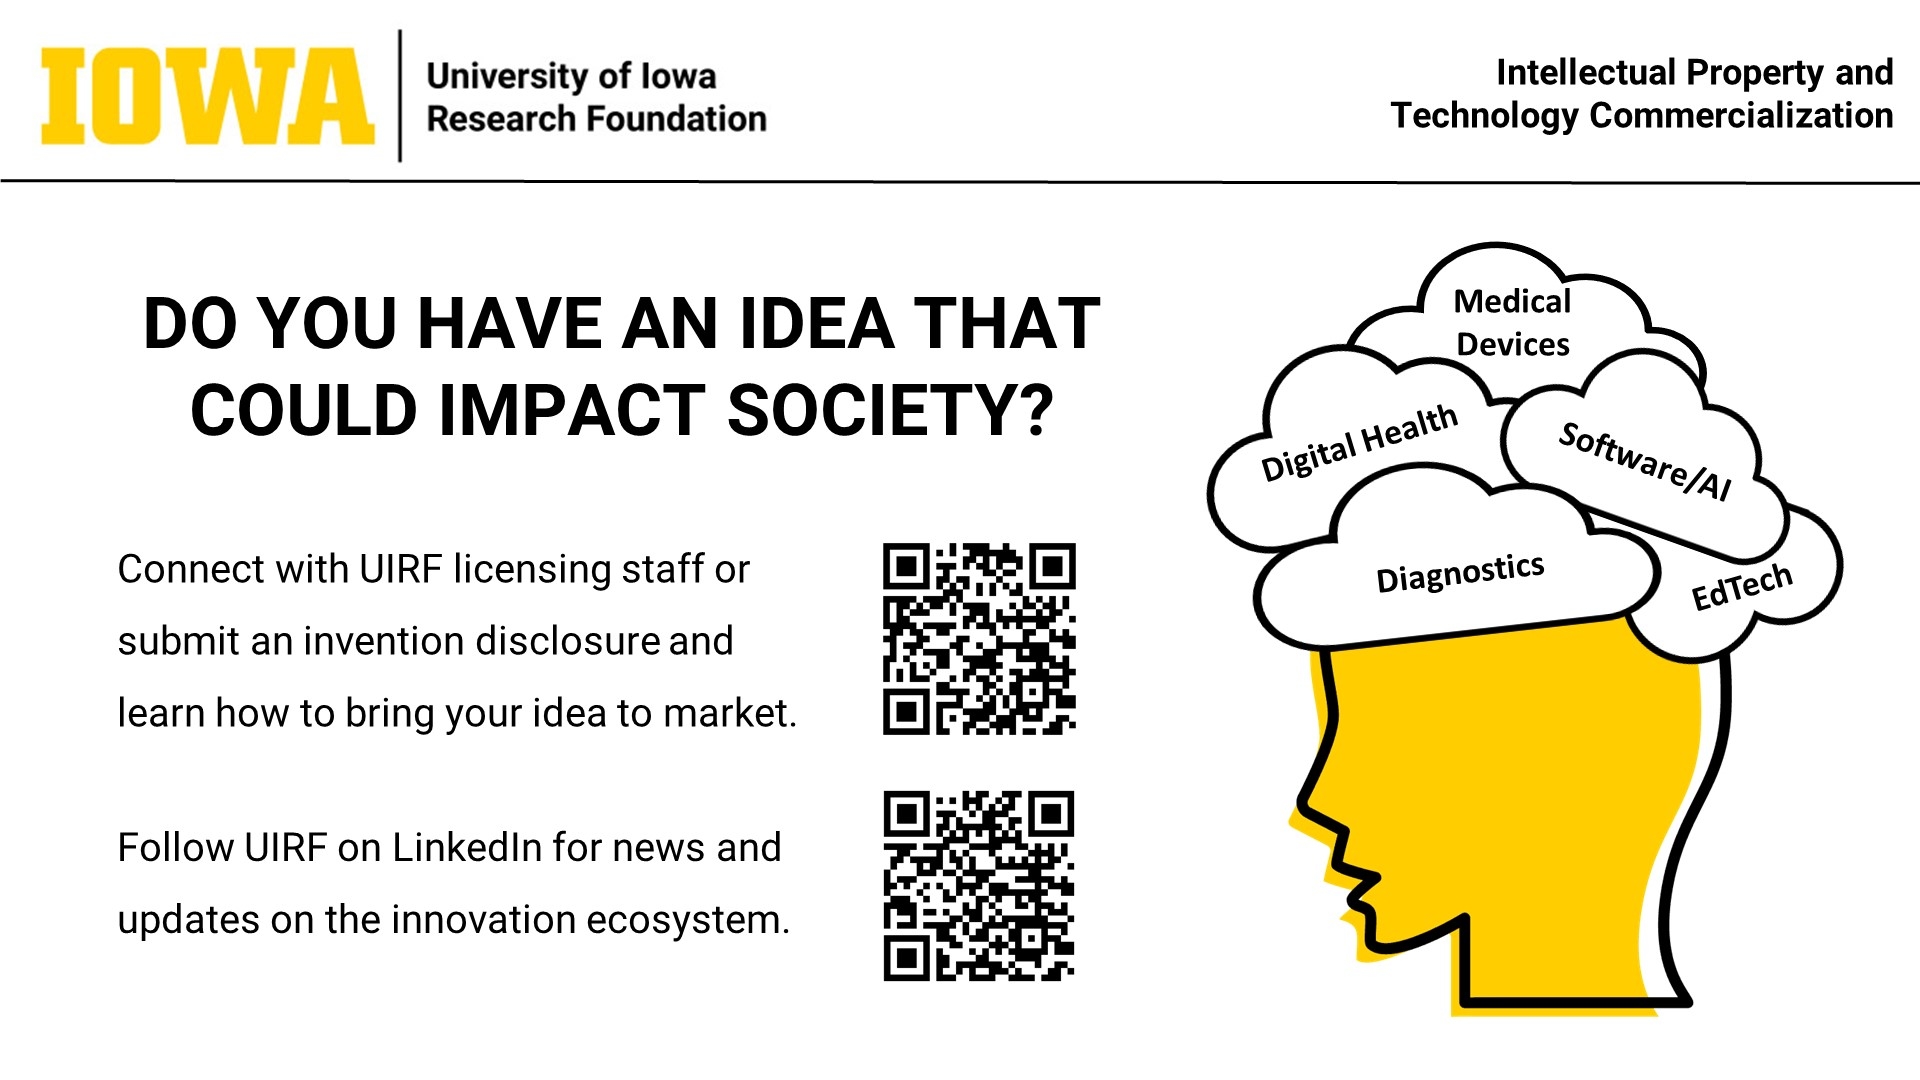 Have an idea that could impact society? Connect with the University of Iowa Research Foundation to learn how to bring your idea to market